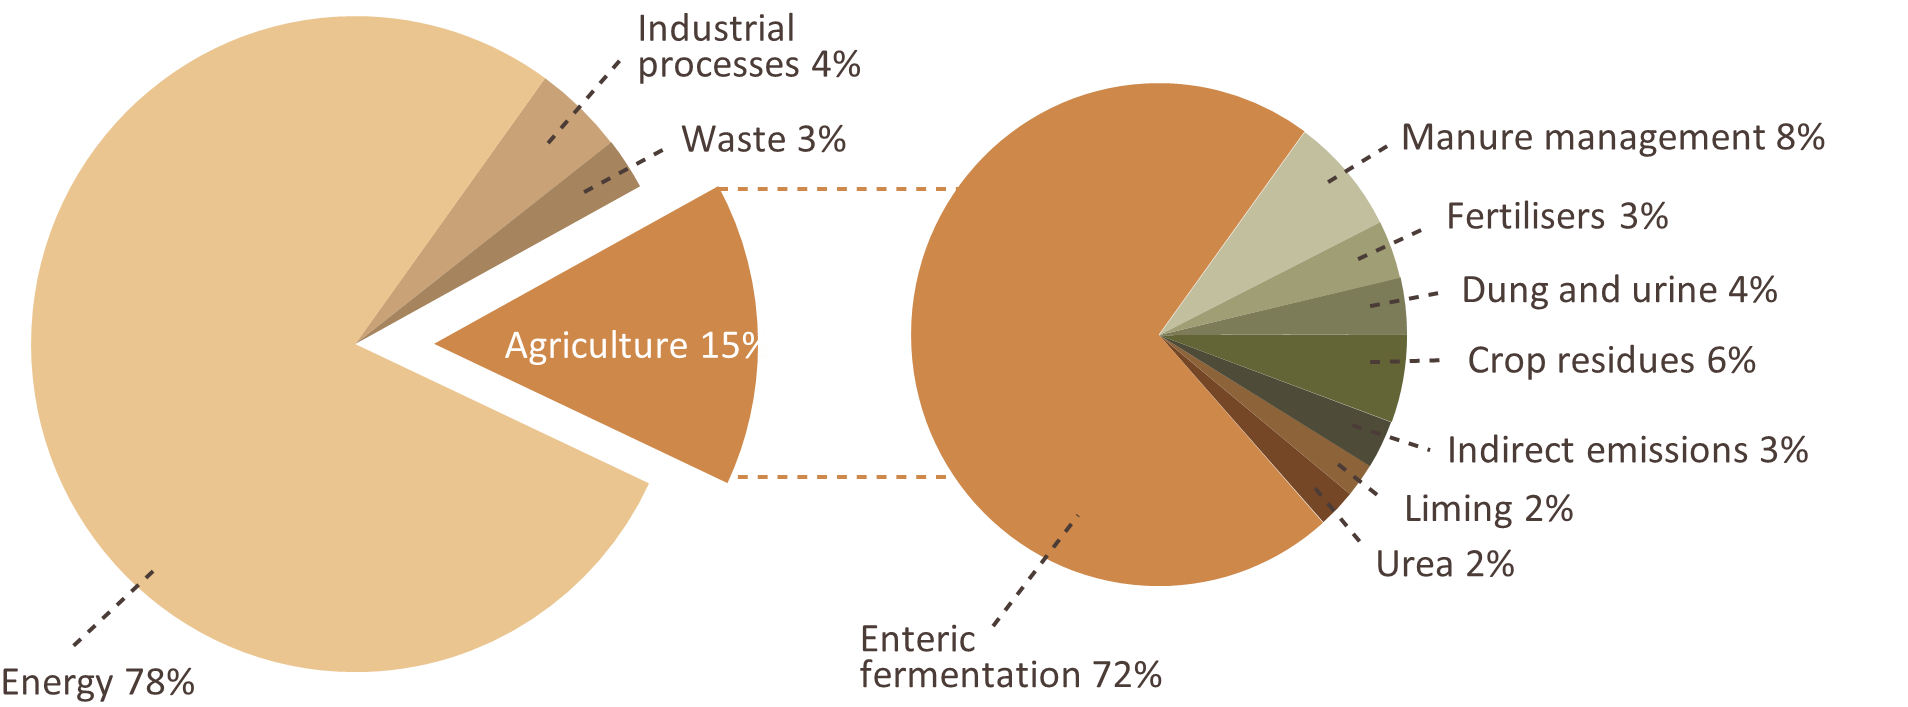 The two pie graphs show the total greenhouse gas (GHG) emissions for Australia by United Nations Framework Convention on Climate Change, net of Land Use, Land Use Change and Forestry sector (left) and the breakdown of agricultural emissions by IPCC source.